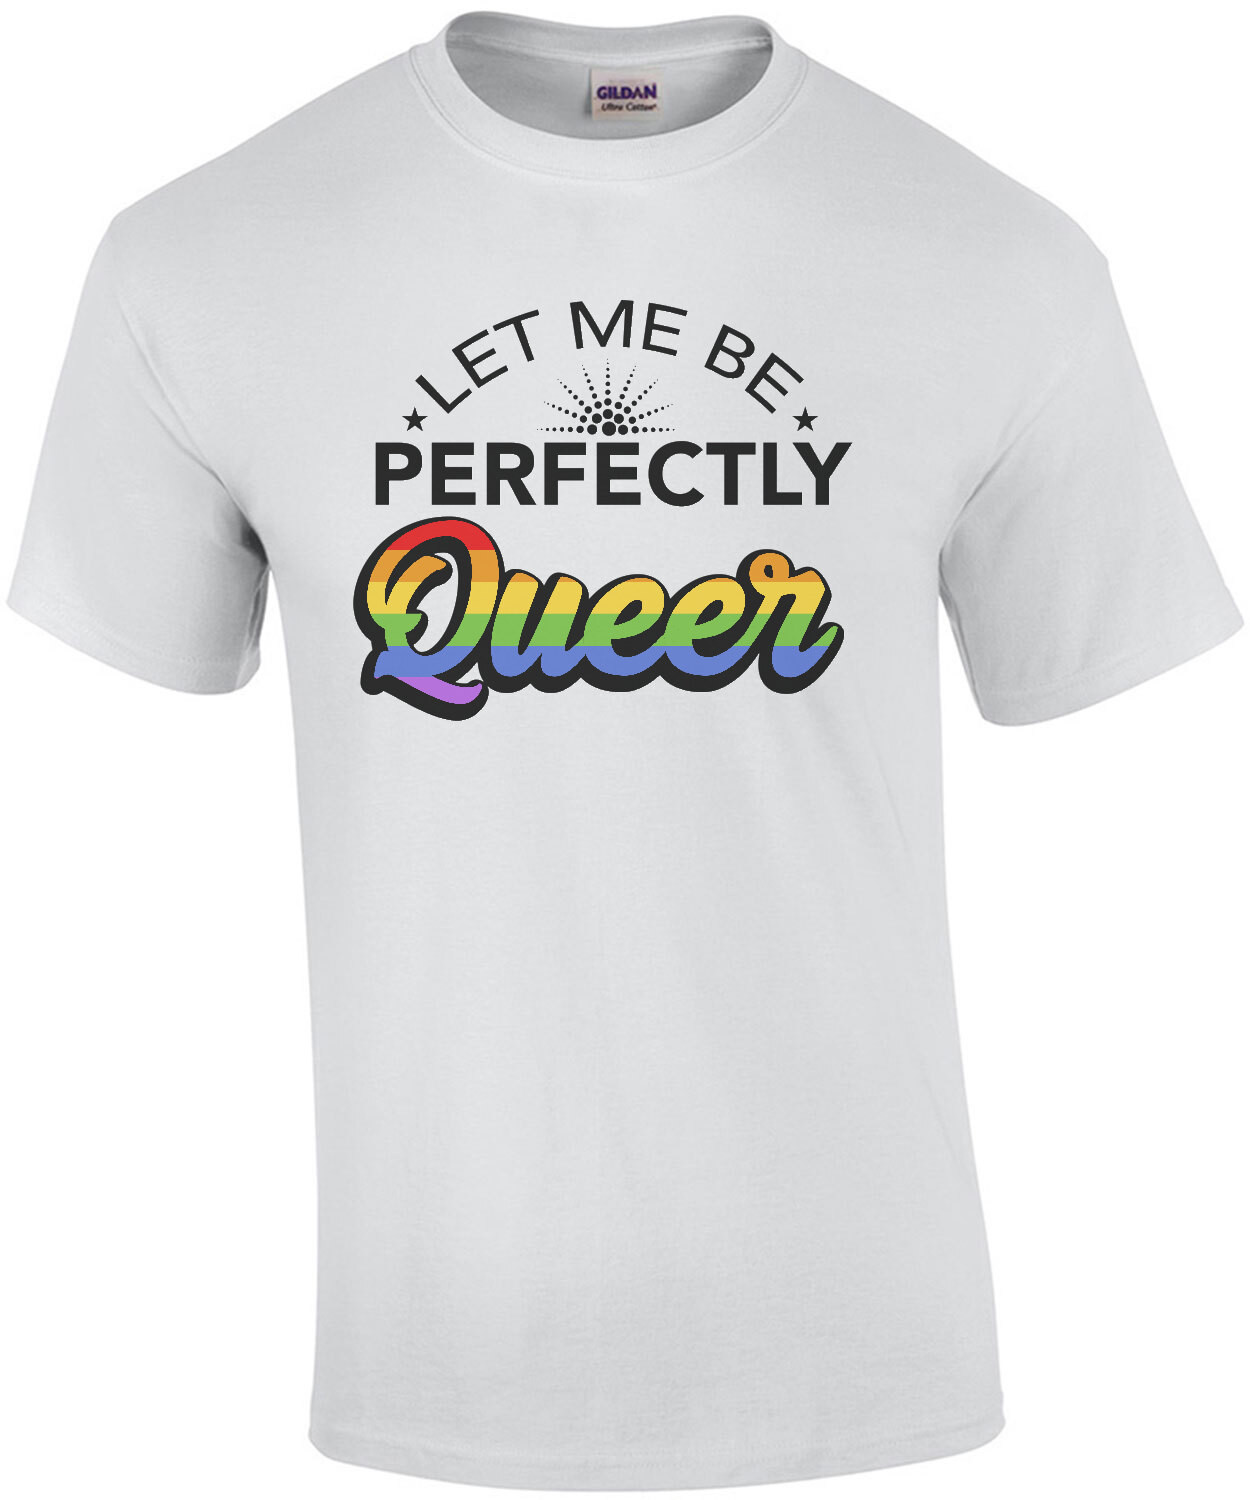 Let me be perfectly queer - funny gay price t-shirt / LGBTQ T-Shirt